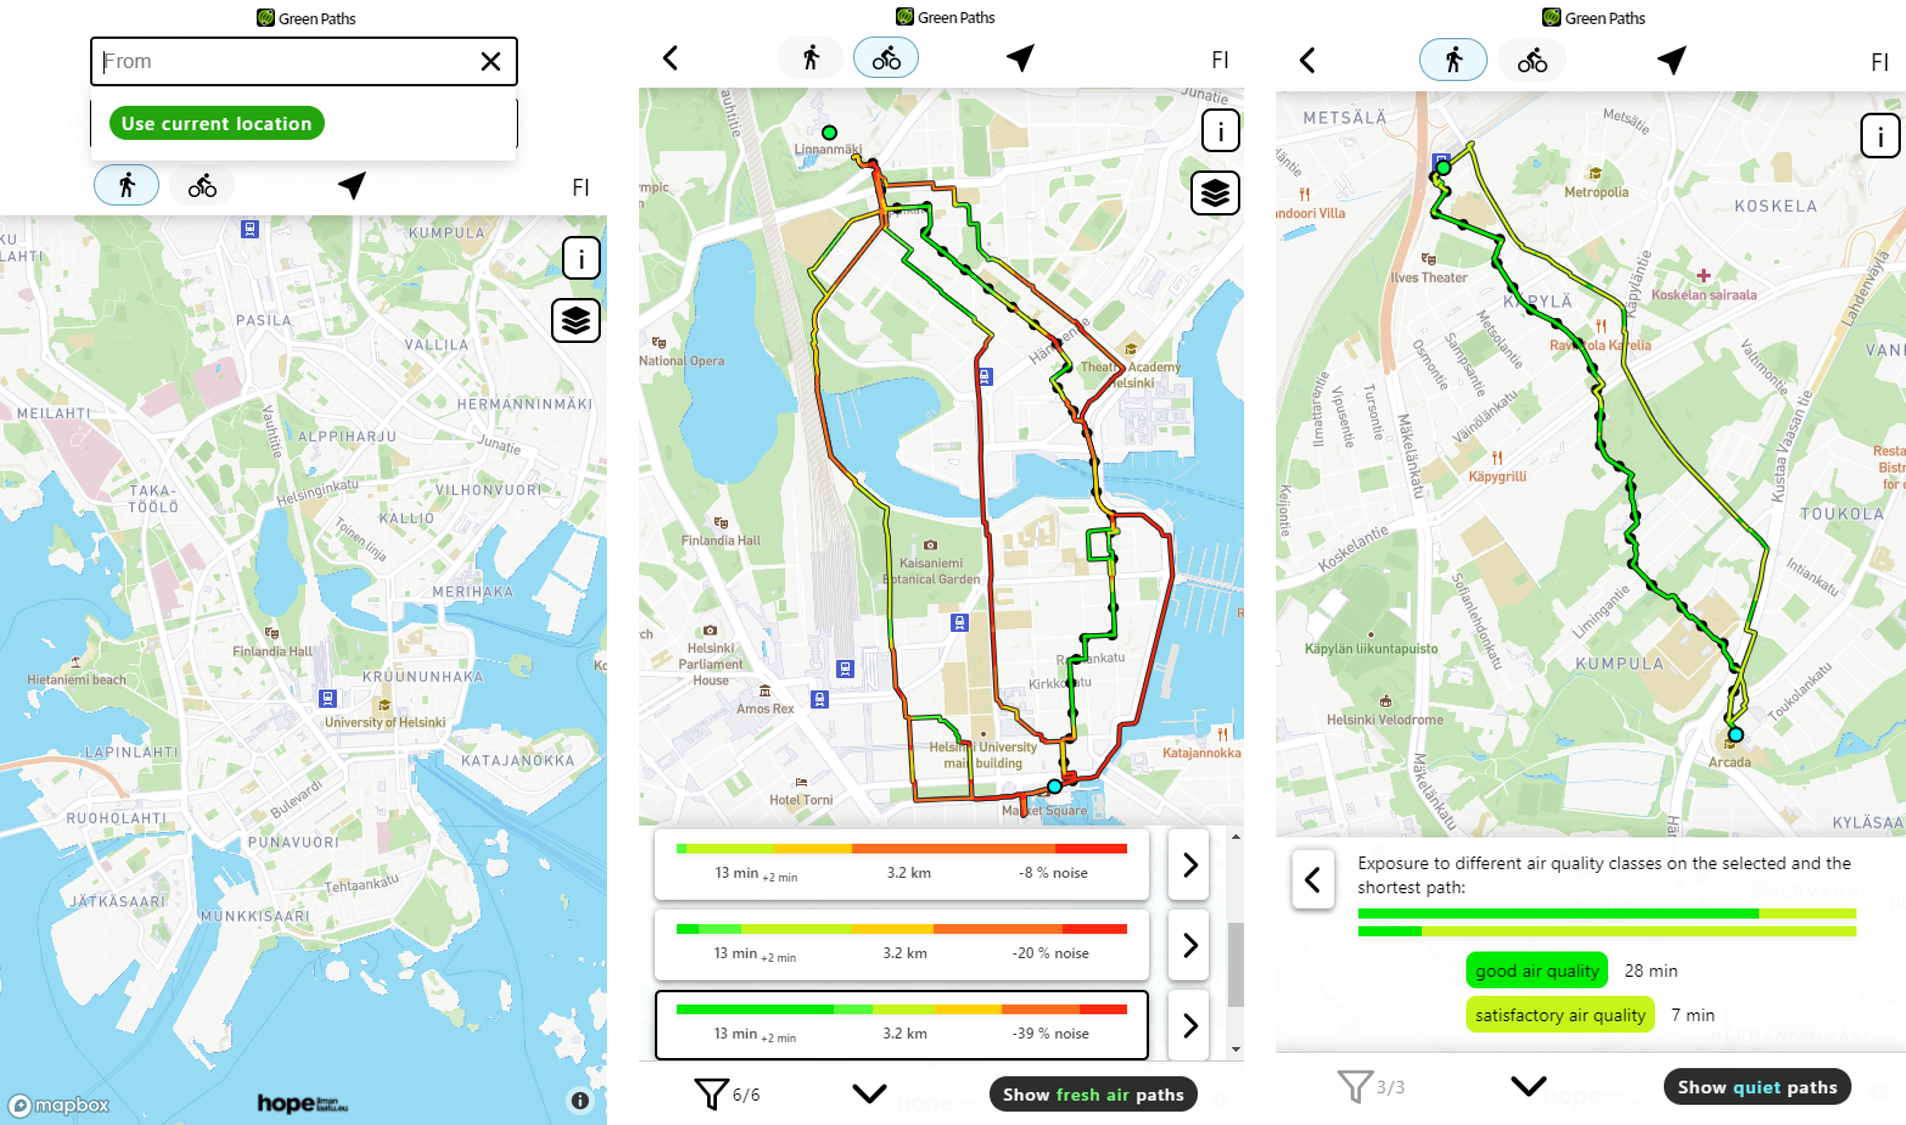 Green Paths routing tool